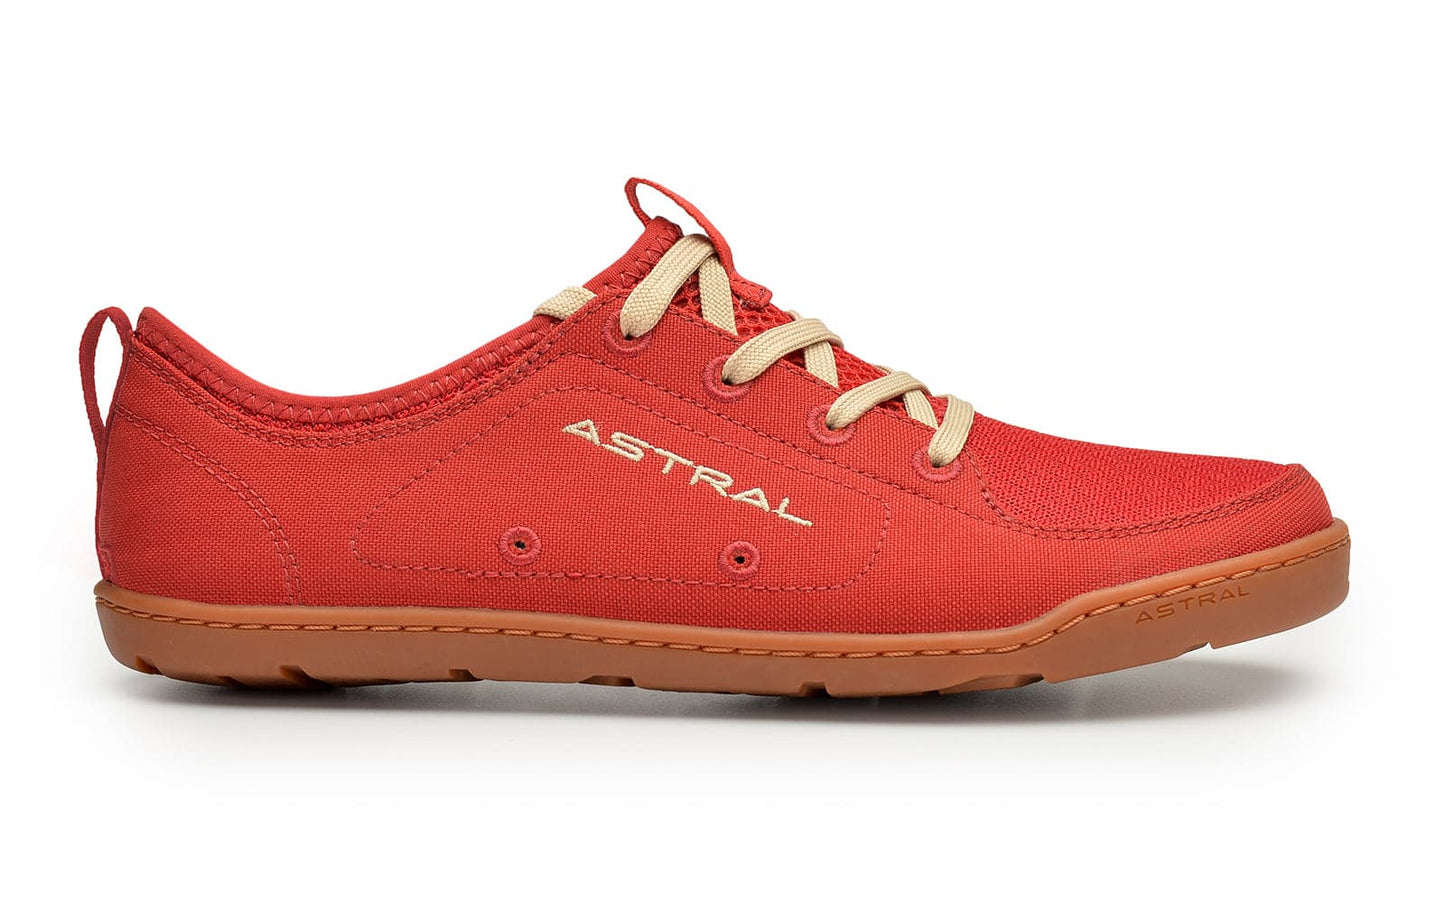 Featuring the Loyak - Women's women's footwear manufactured by Astral shown here from a seventh angle.